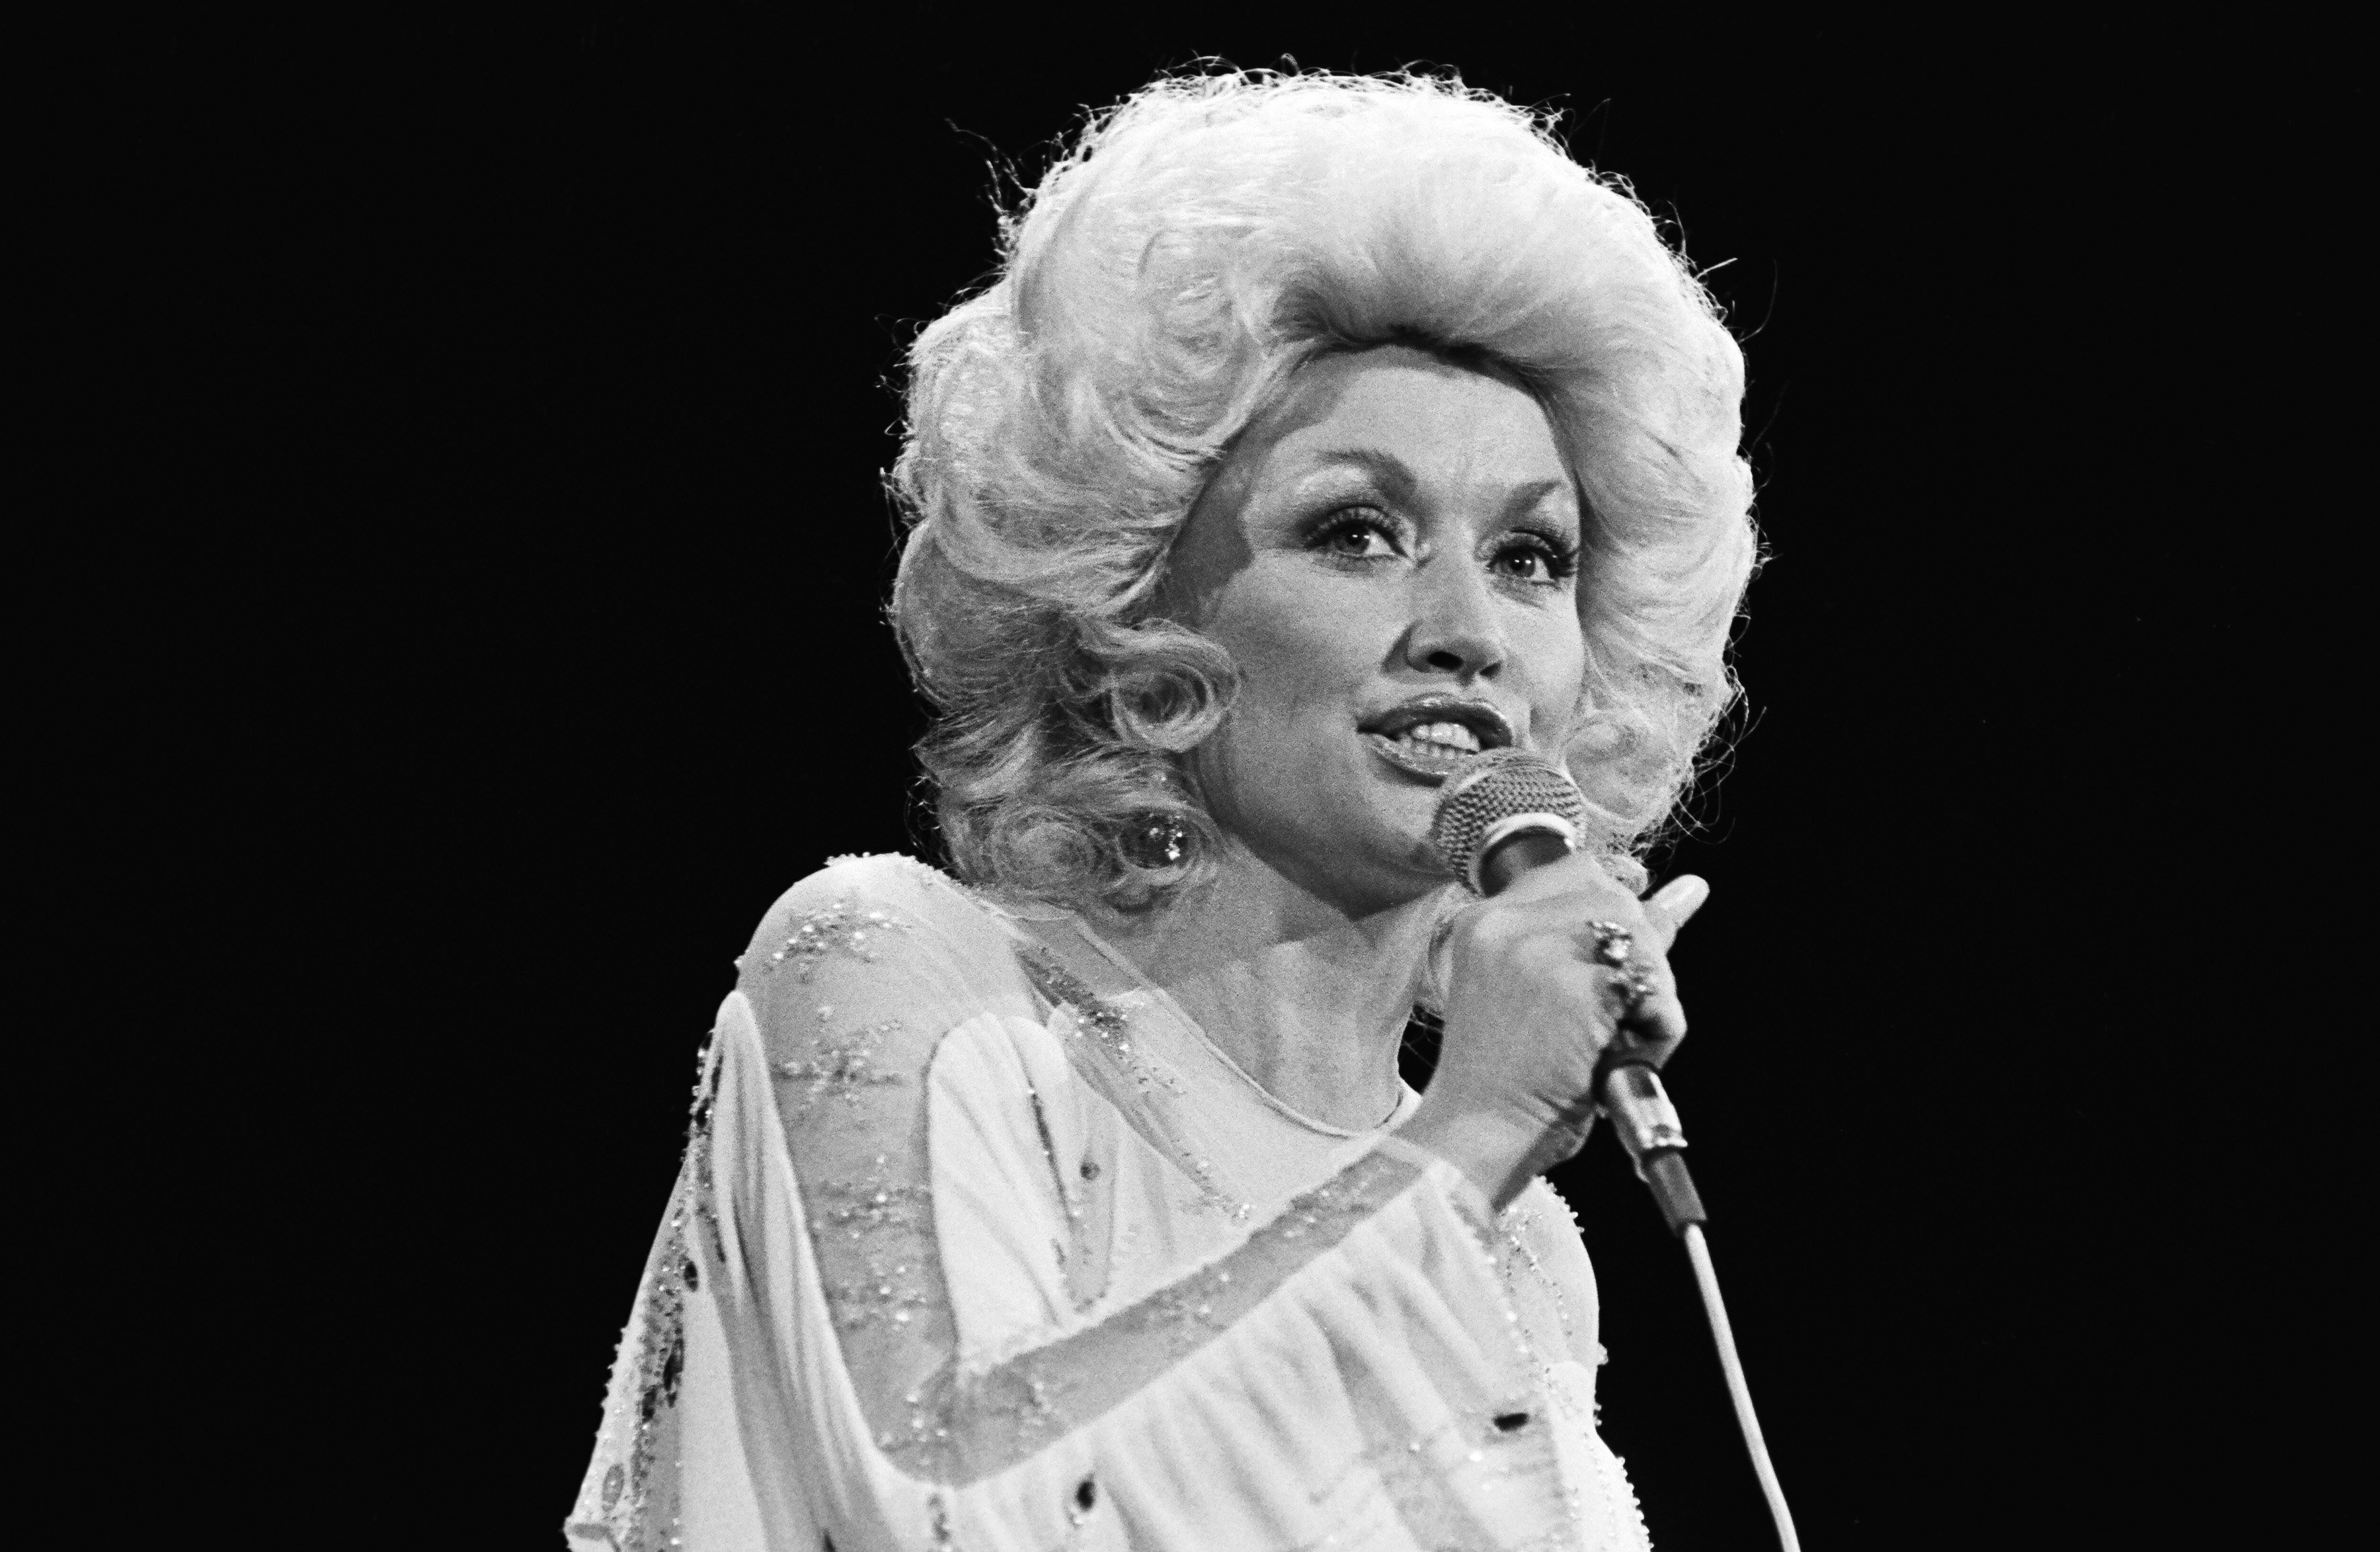 Dolly Parton singing into a microphone. The shot is black and white. The year is 1981.